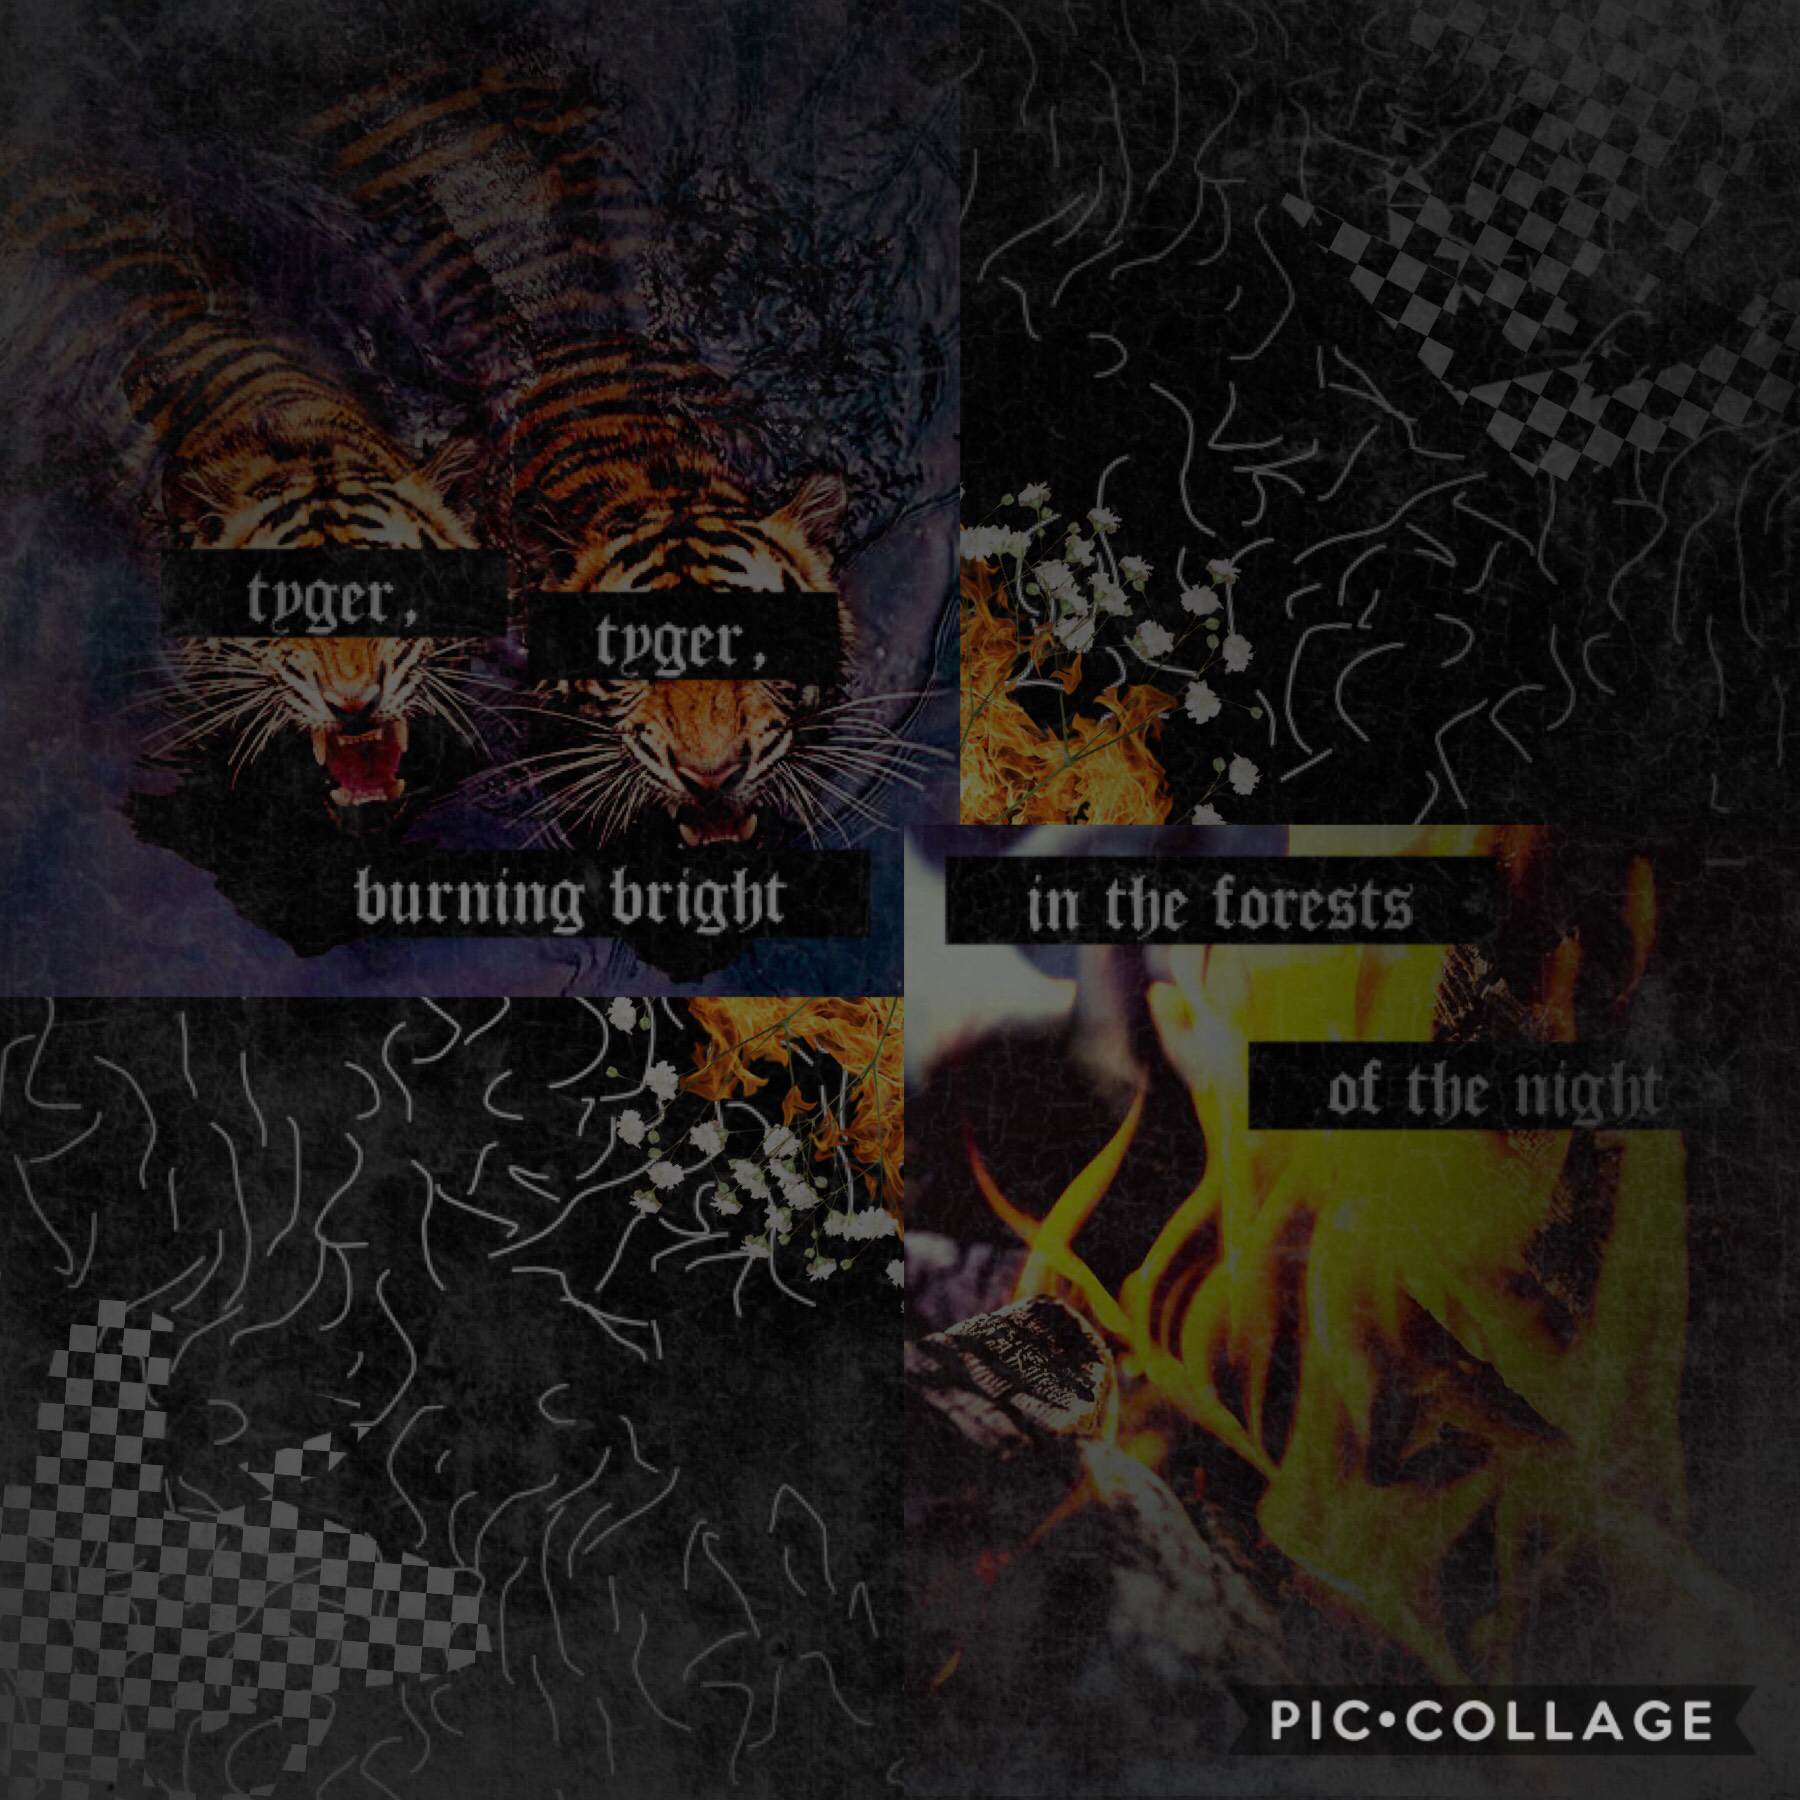 🔥🐯🔥
Woot
I like how this turned out
I really really love this poem. 
We sang it as a song in choir at music camp so that’s cool 😎 
I might make this a series/theme?
